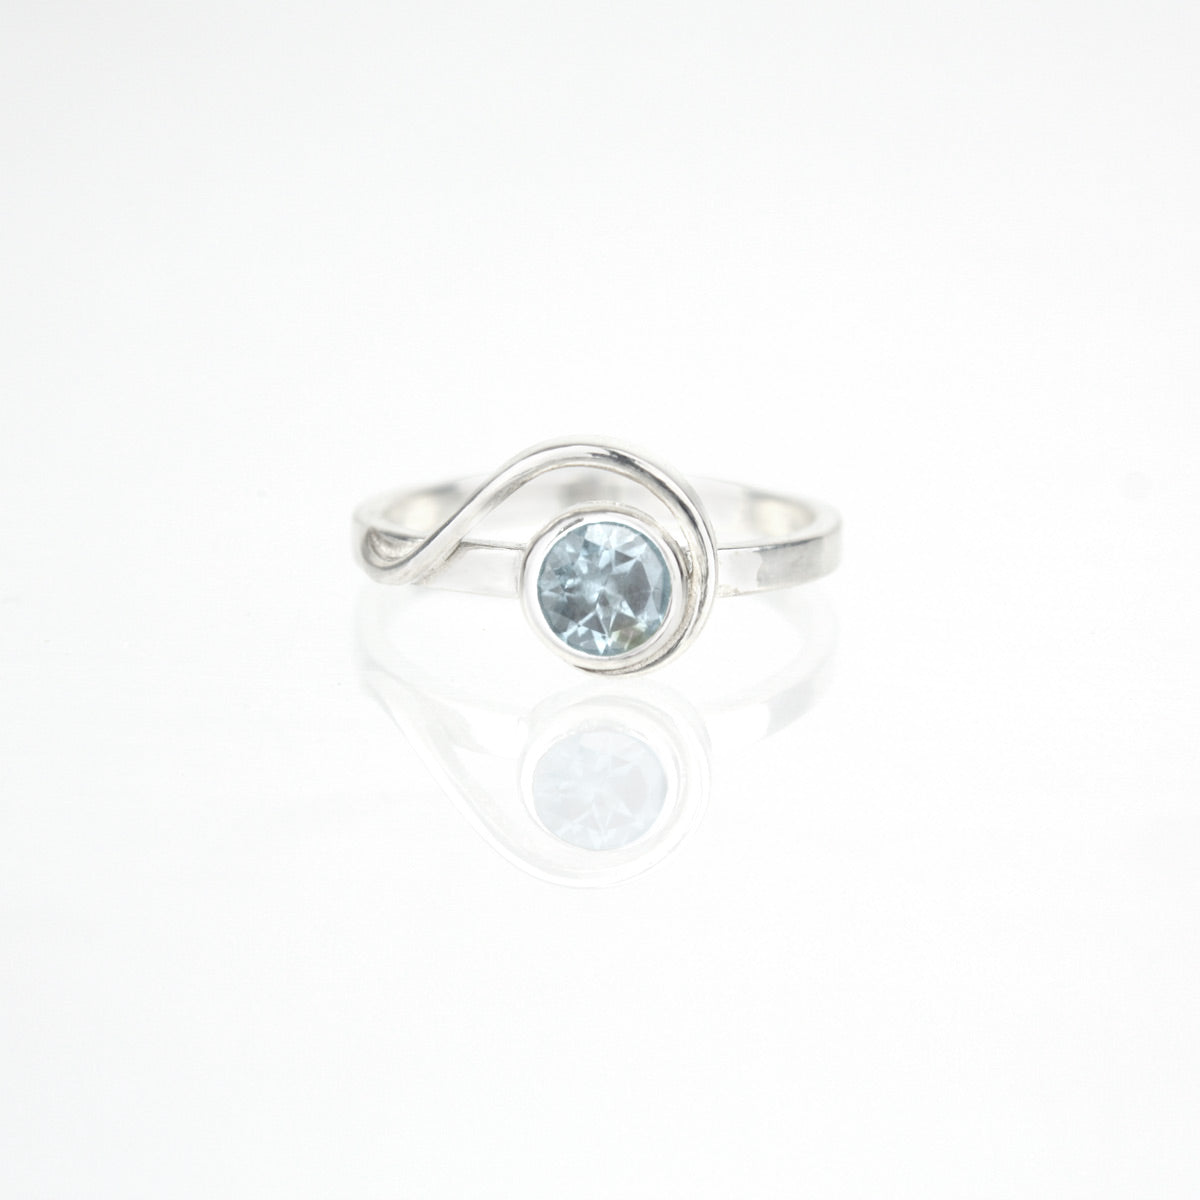 Spiral Ring with 5mm Sky Blue Topaz